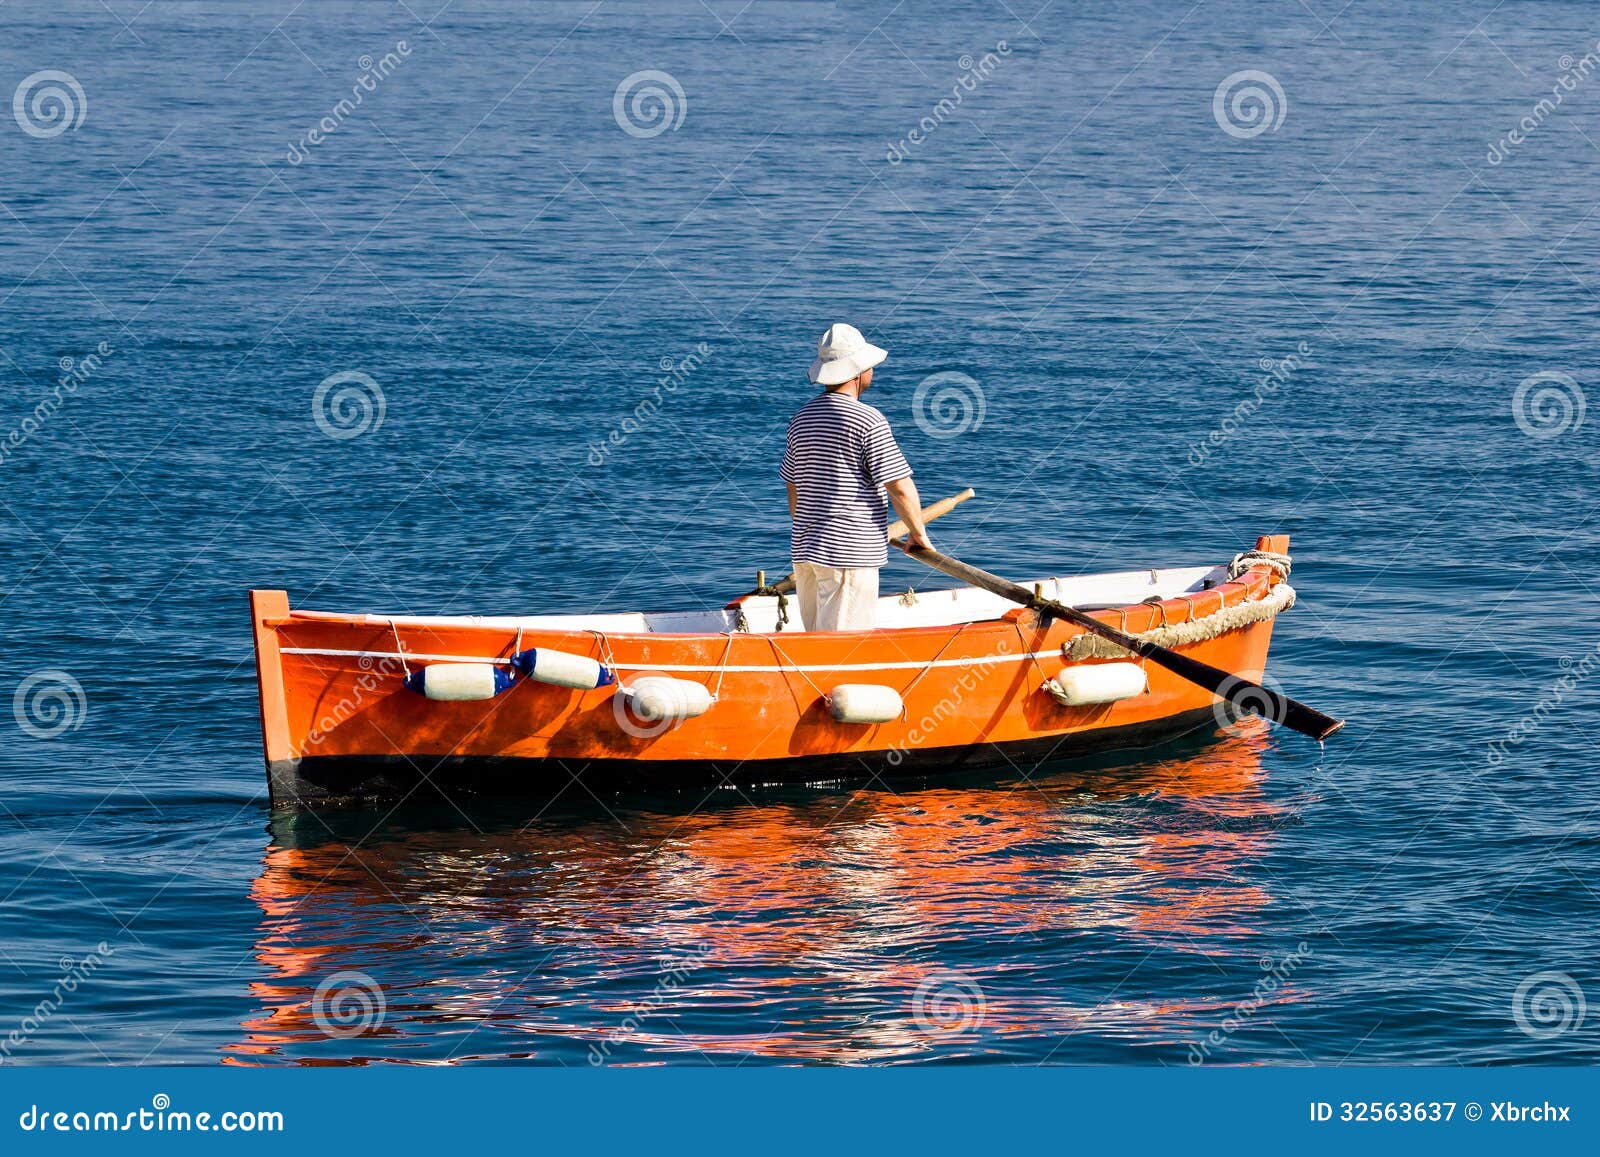 Sailor Rowing On Wooden Taxi Boat Stock Image - Image of ...